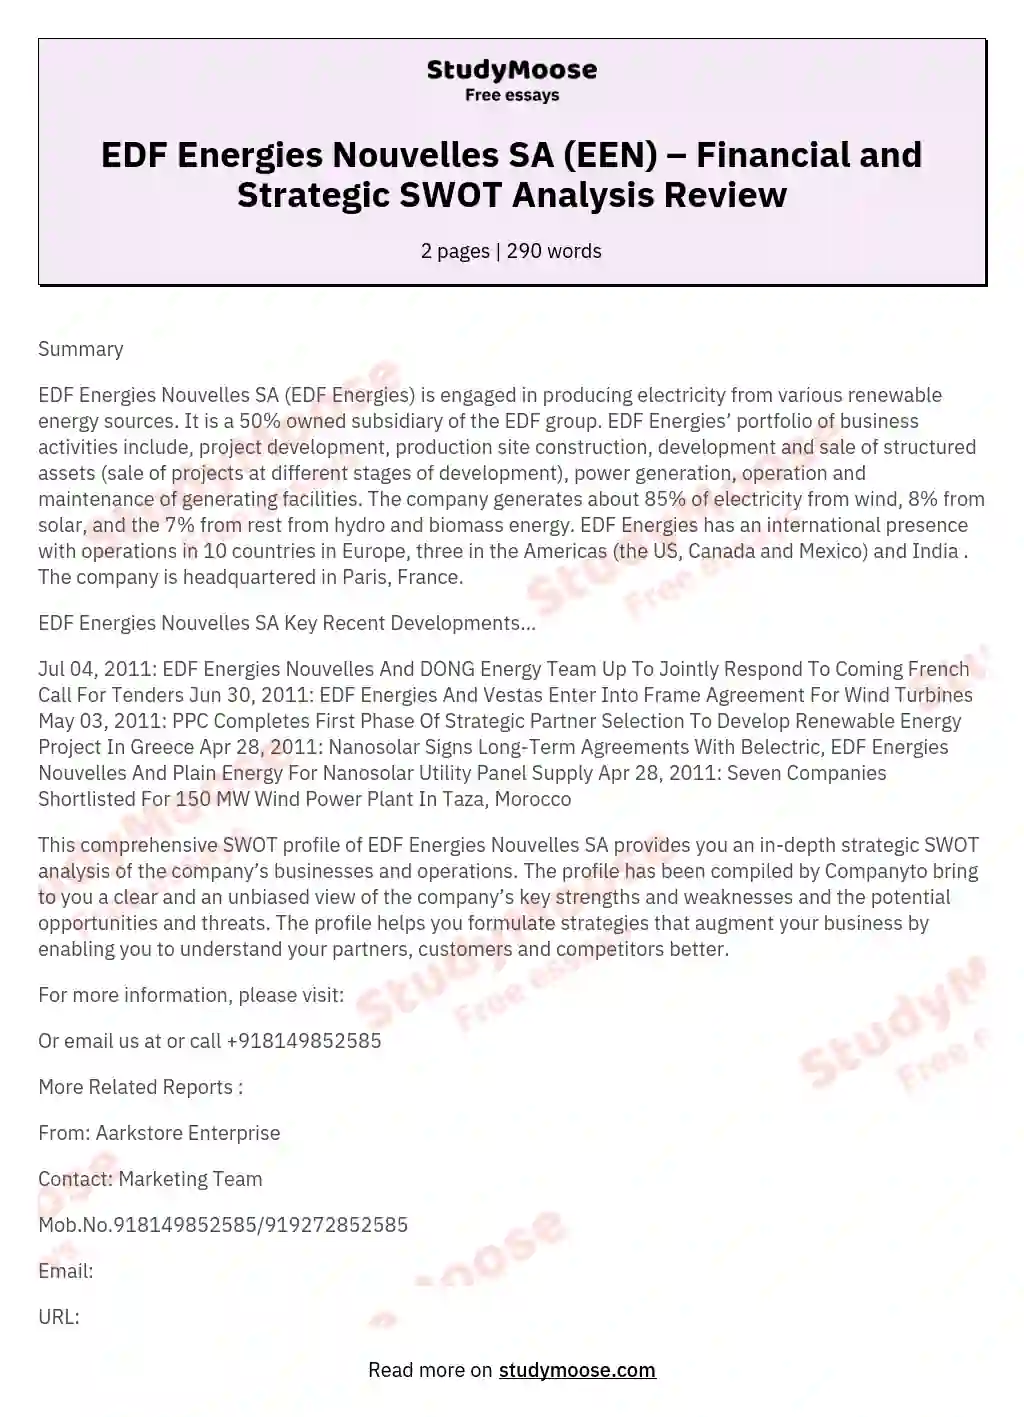 EDF Energies Nouvelles SA (EEN) – Financial and Strategic SWOT Analysis Review essay